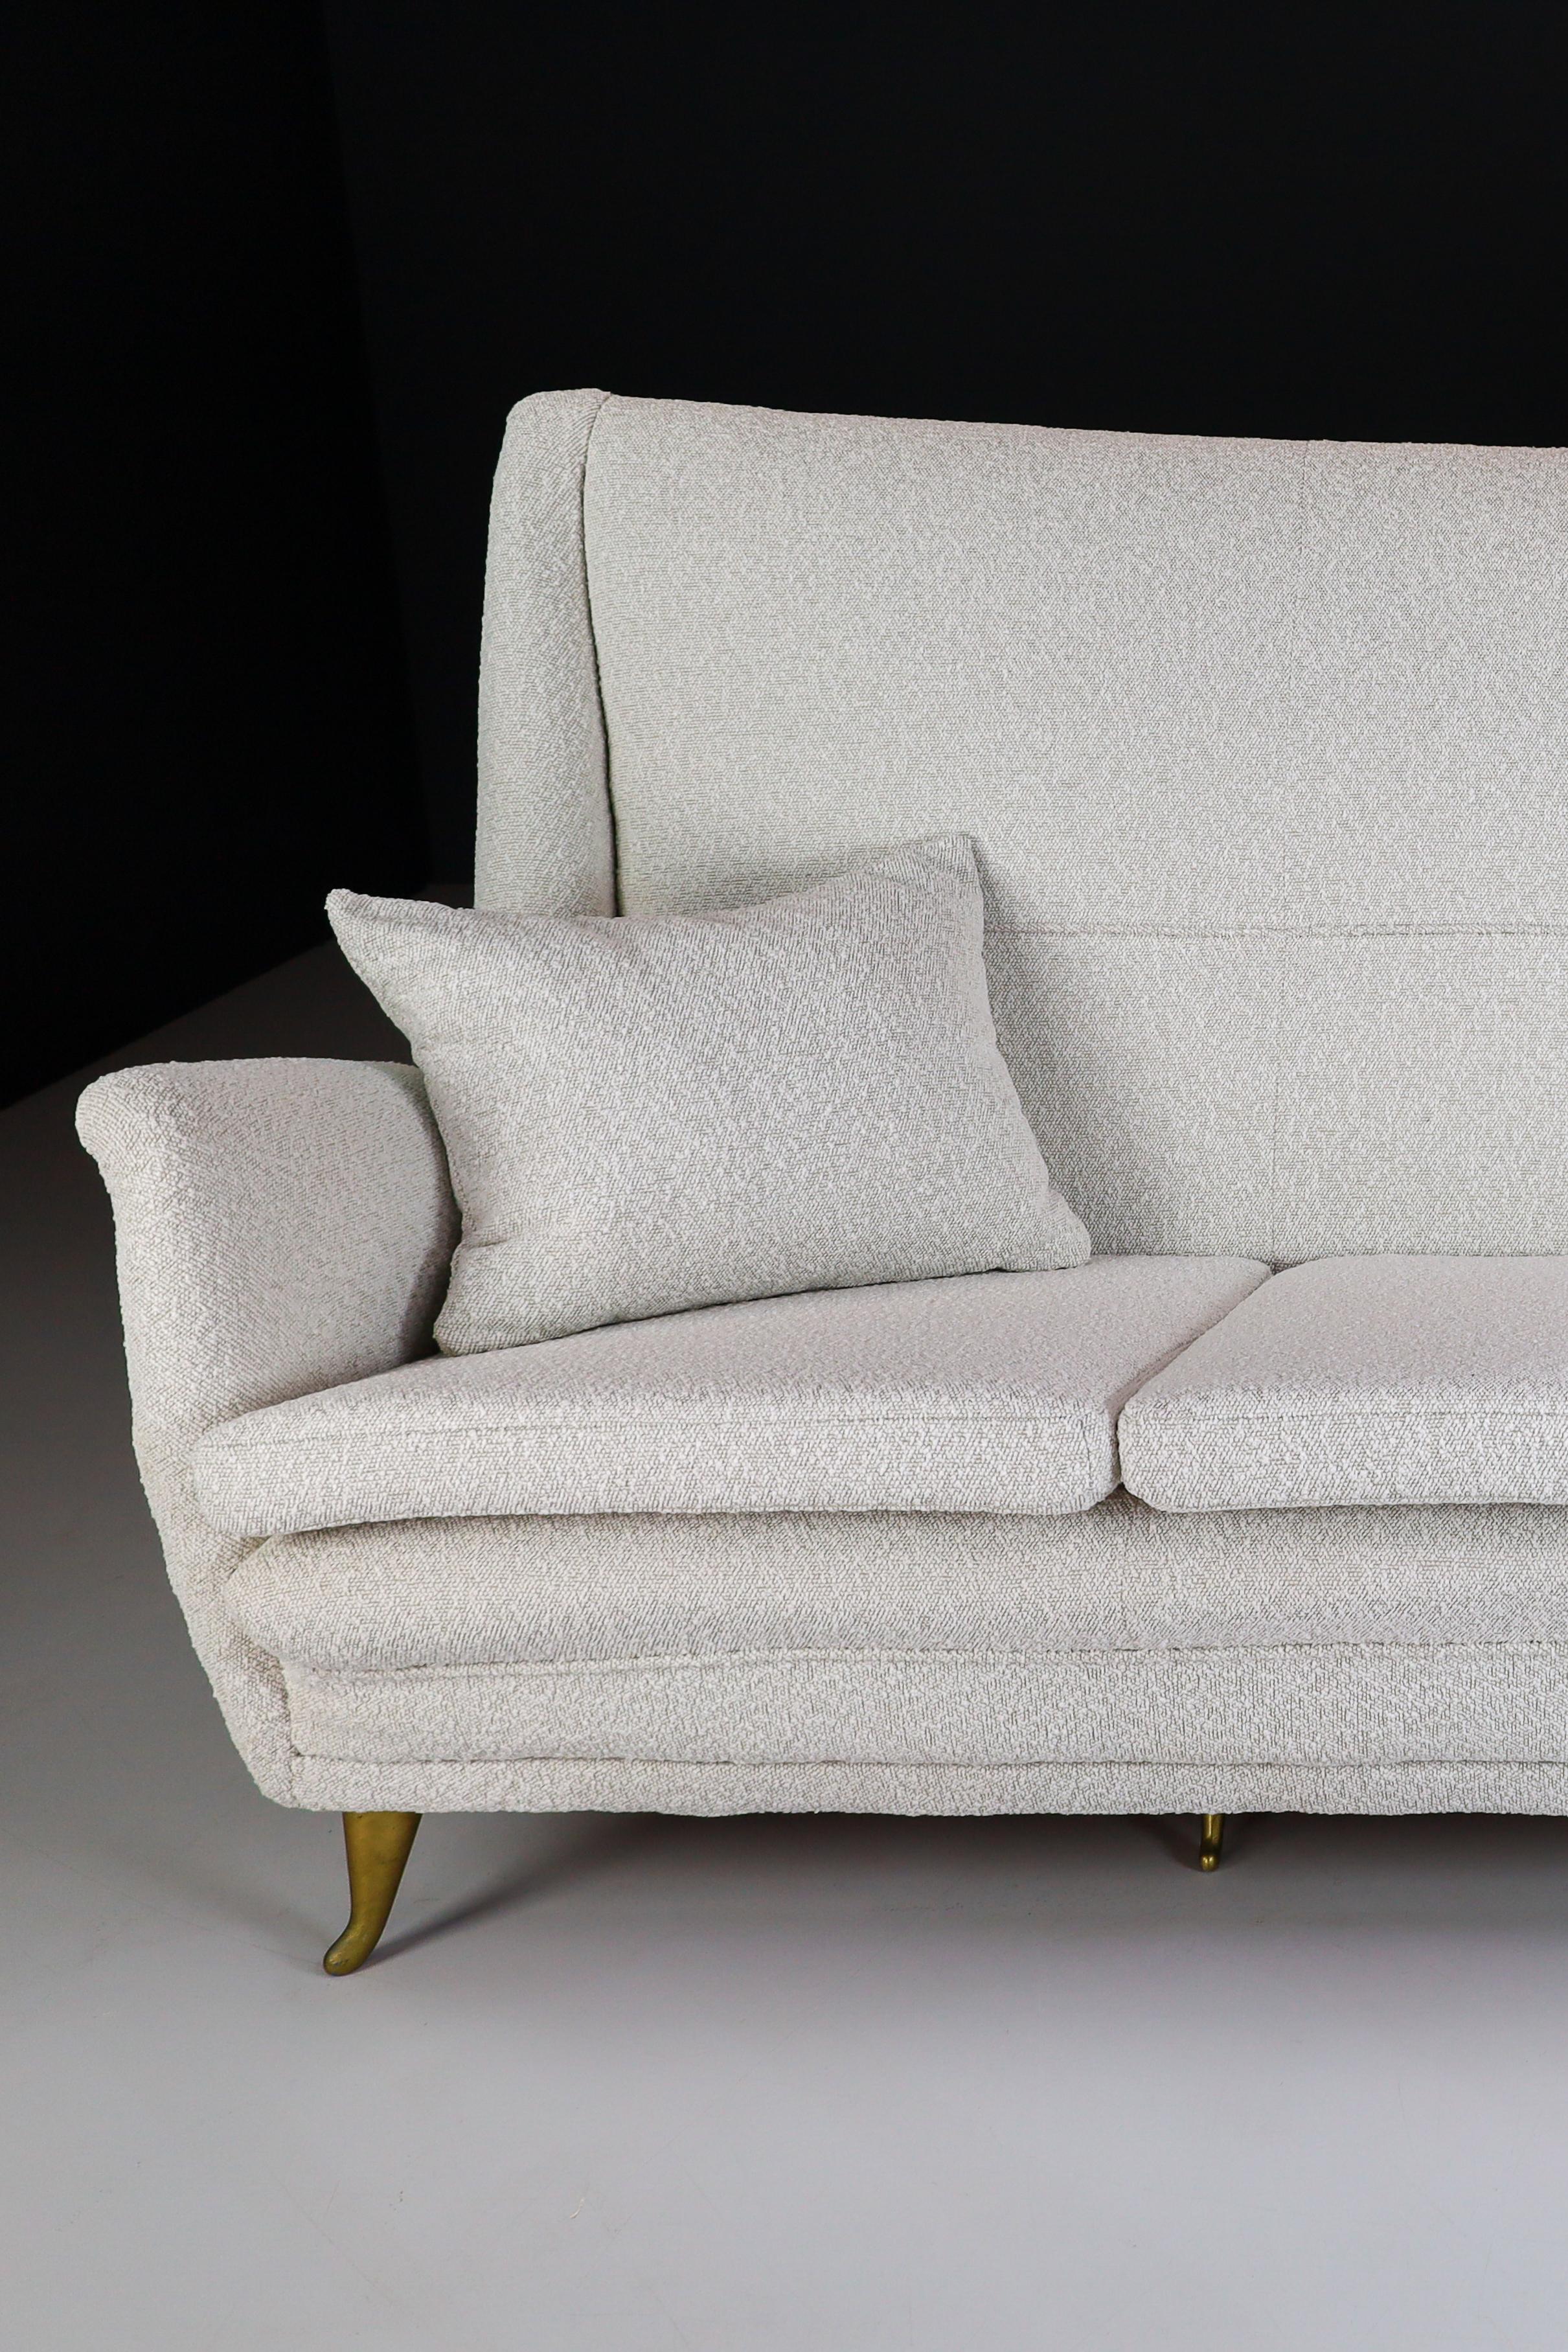 High Back Sofa By Gio Ponti For ISA Bergamo in Bouclé Fabric Upholstery 1950s For Sale 5